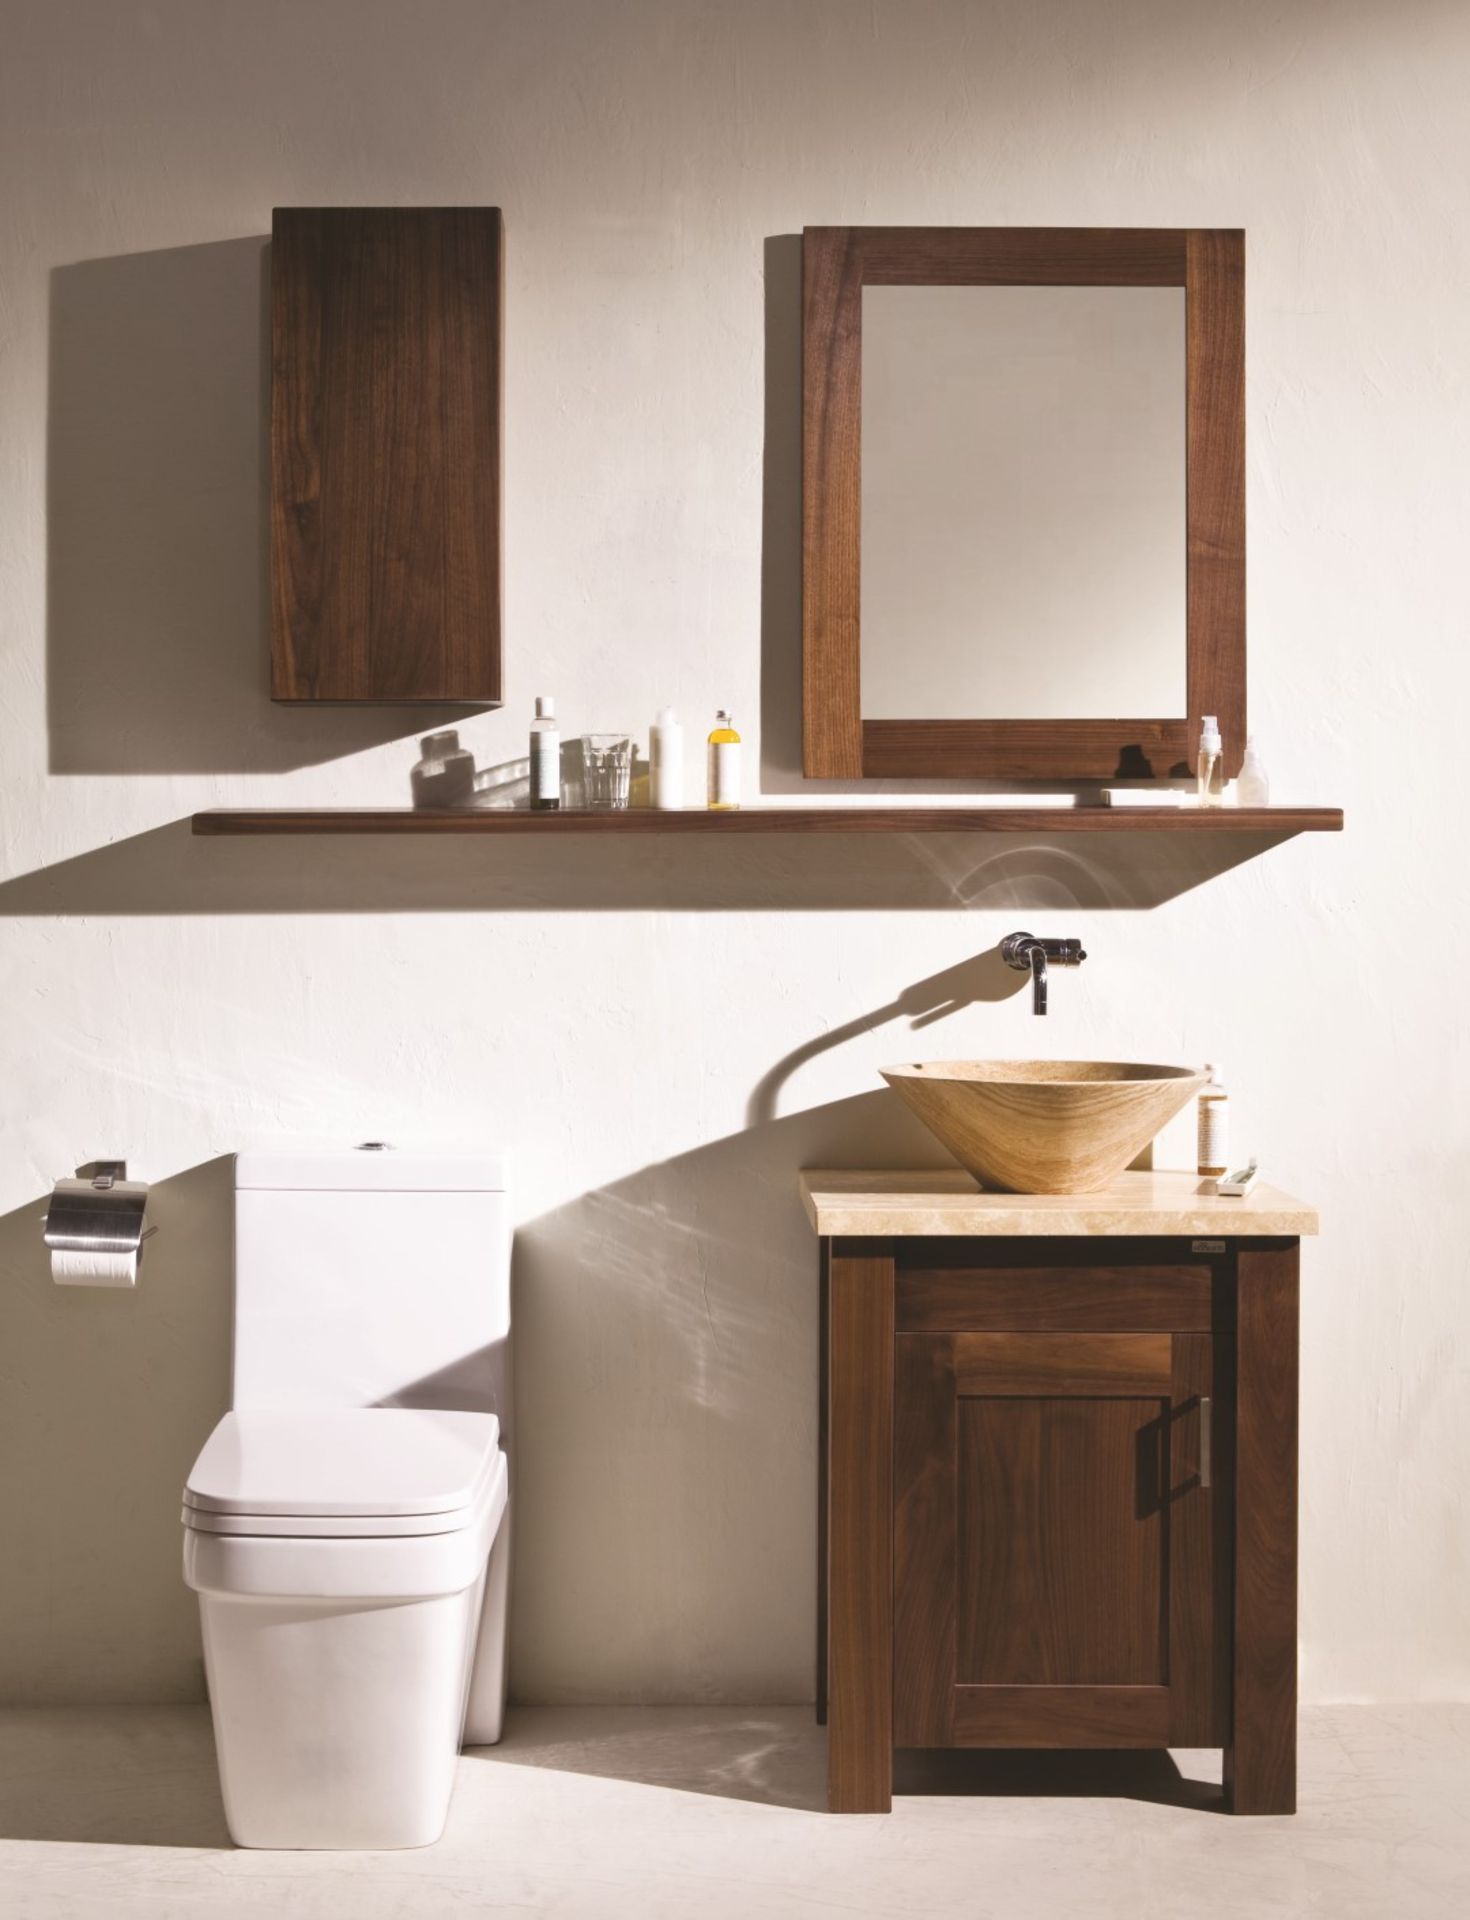 1 x Stonearth Bathroom Storage Shelf With Concealed Brackets - American Solid Walnut - Size: 900mm - Image 6 of 16